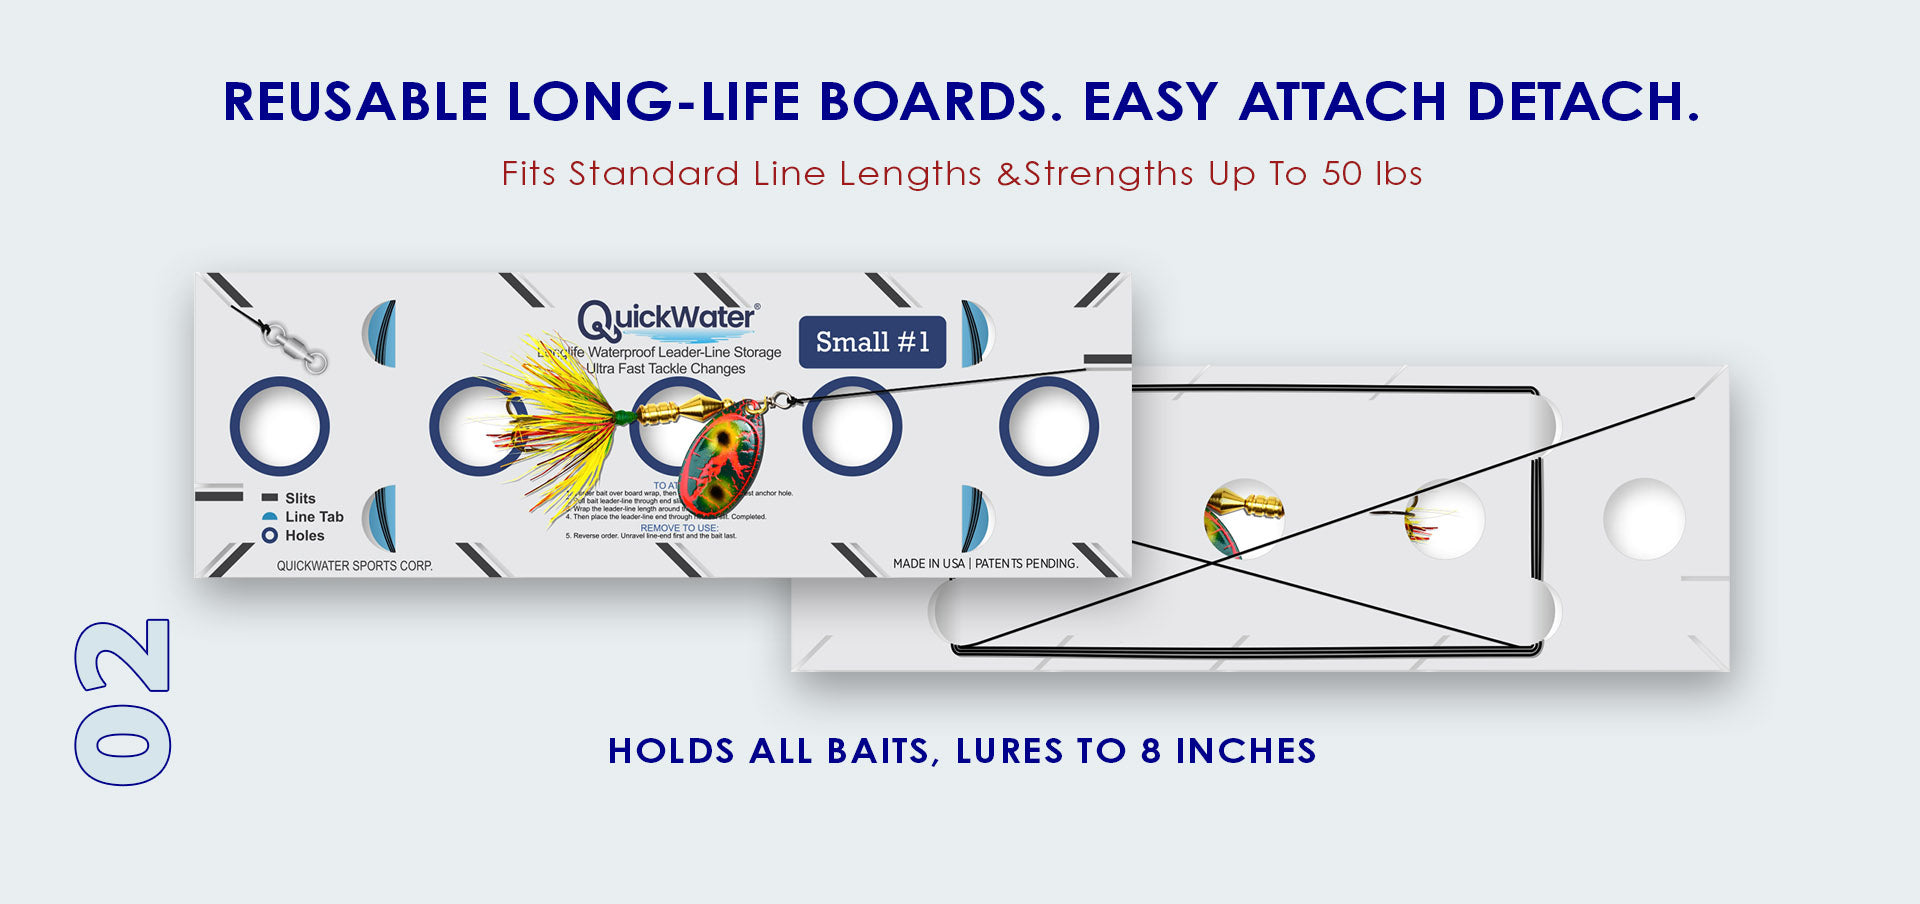 Slide 2: Reusable Long-Life Boards. Easy Attach Detach. Fits Standard Line Lengths & Strengths up to 50lbs. • Holds all baits, lures to 8 inches